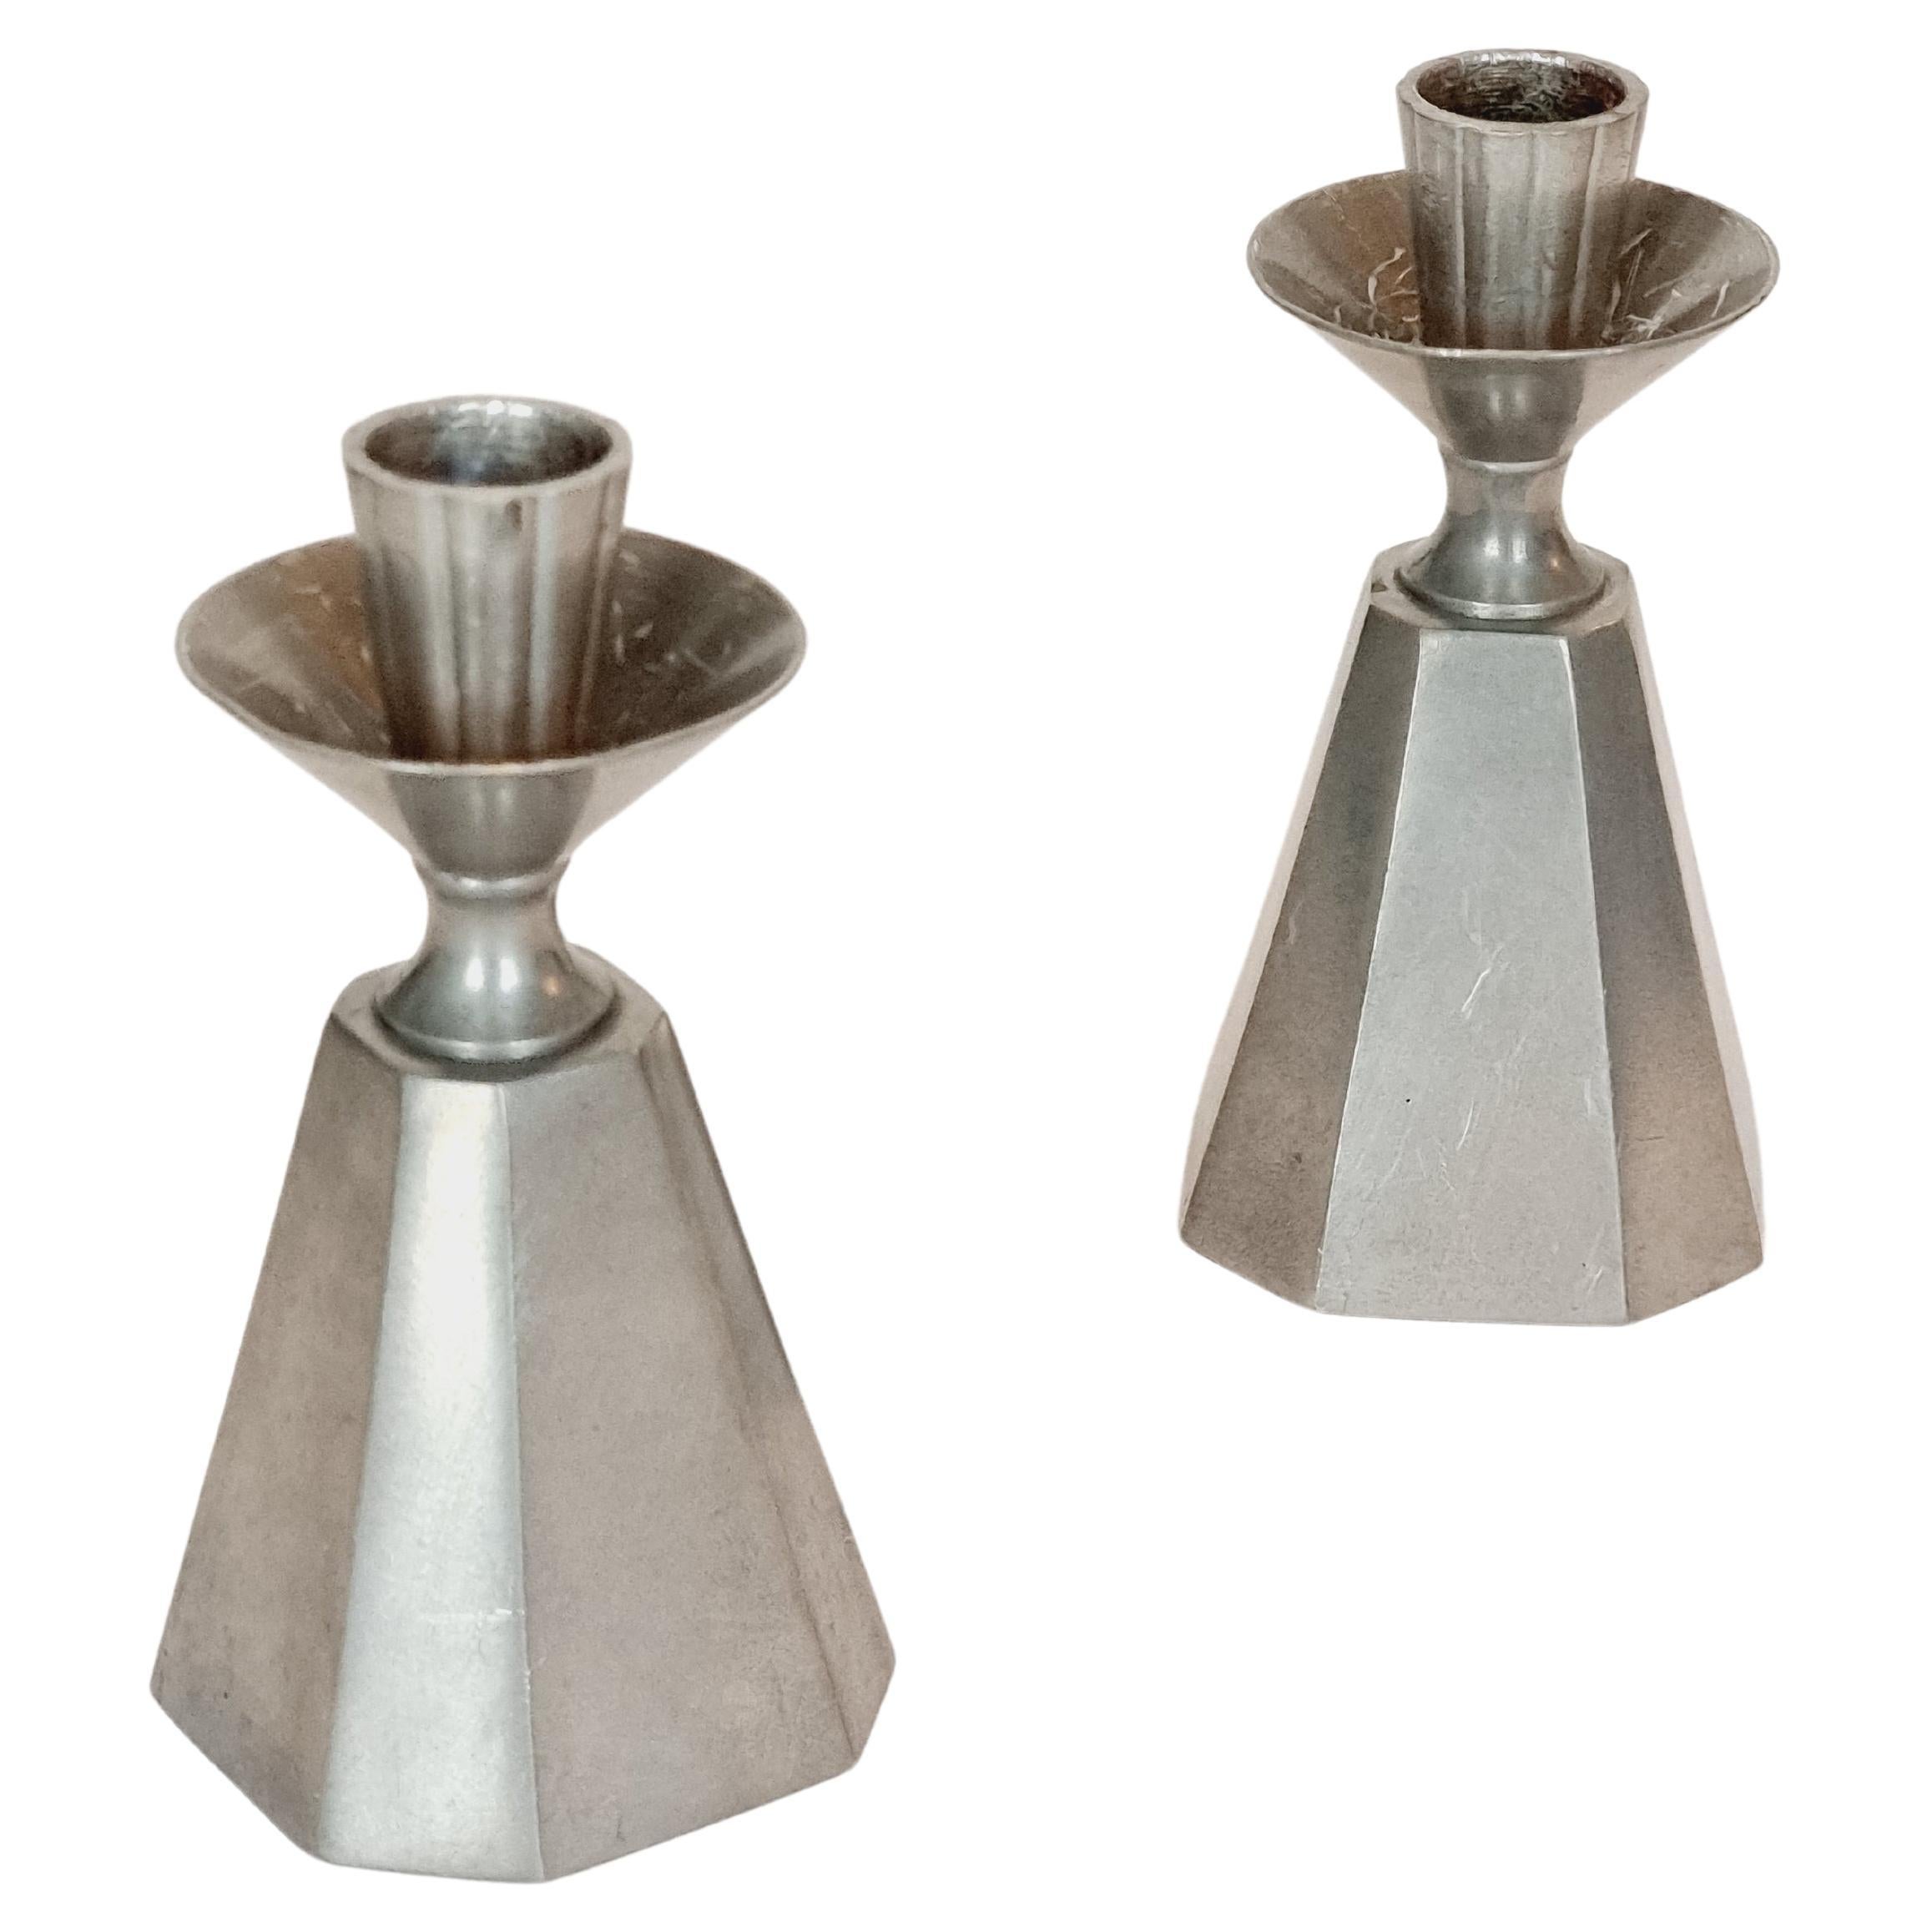 A pair of Swedish / Scandinavian Modern candle holders, in pewter, by GAB 1962